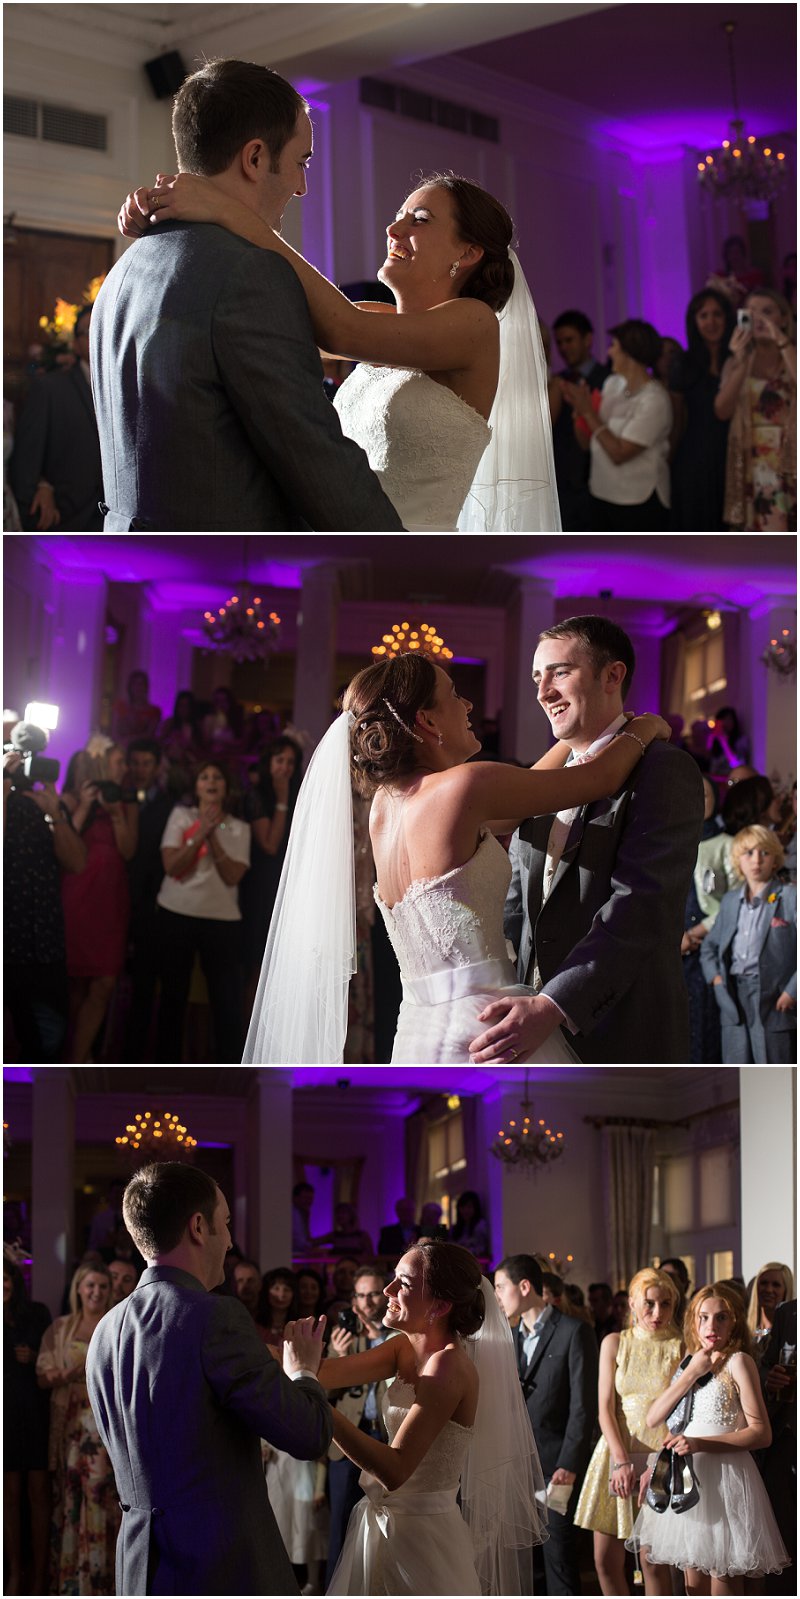 First Dance at West Tower Wedding Venue